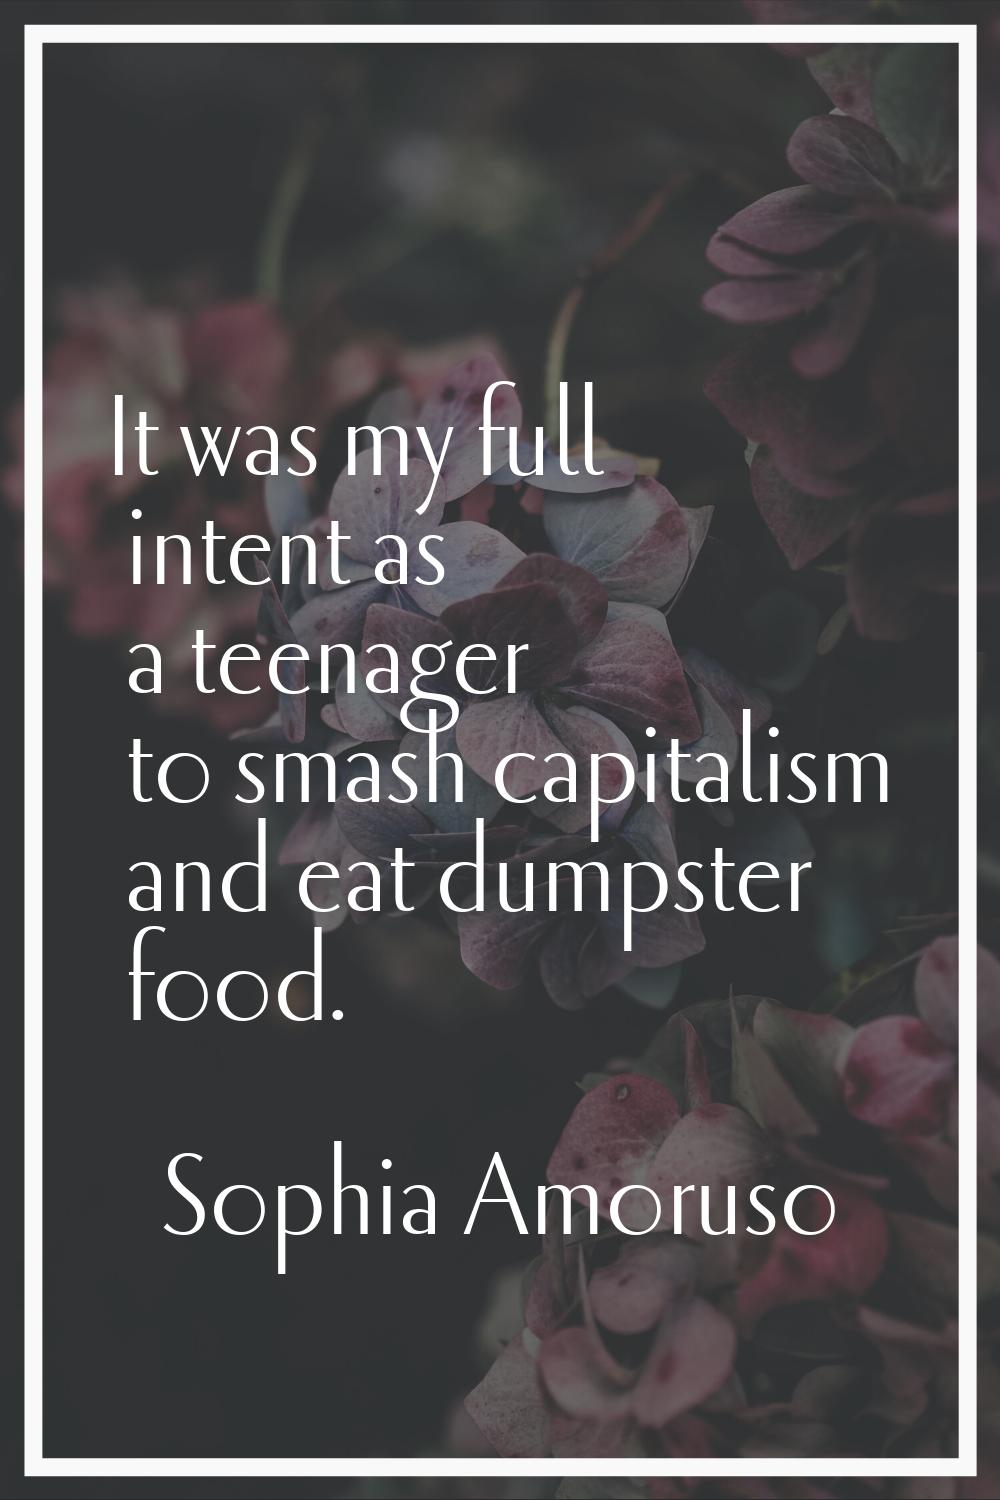 It was my full intent as a teenager to smash capitalism and eat dumpster food.